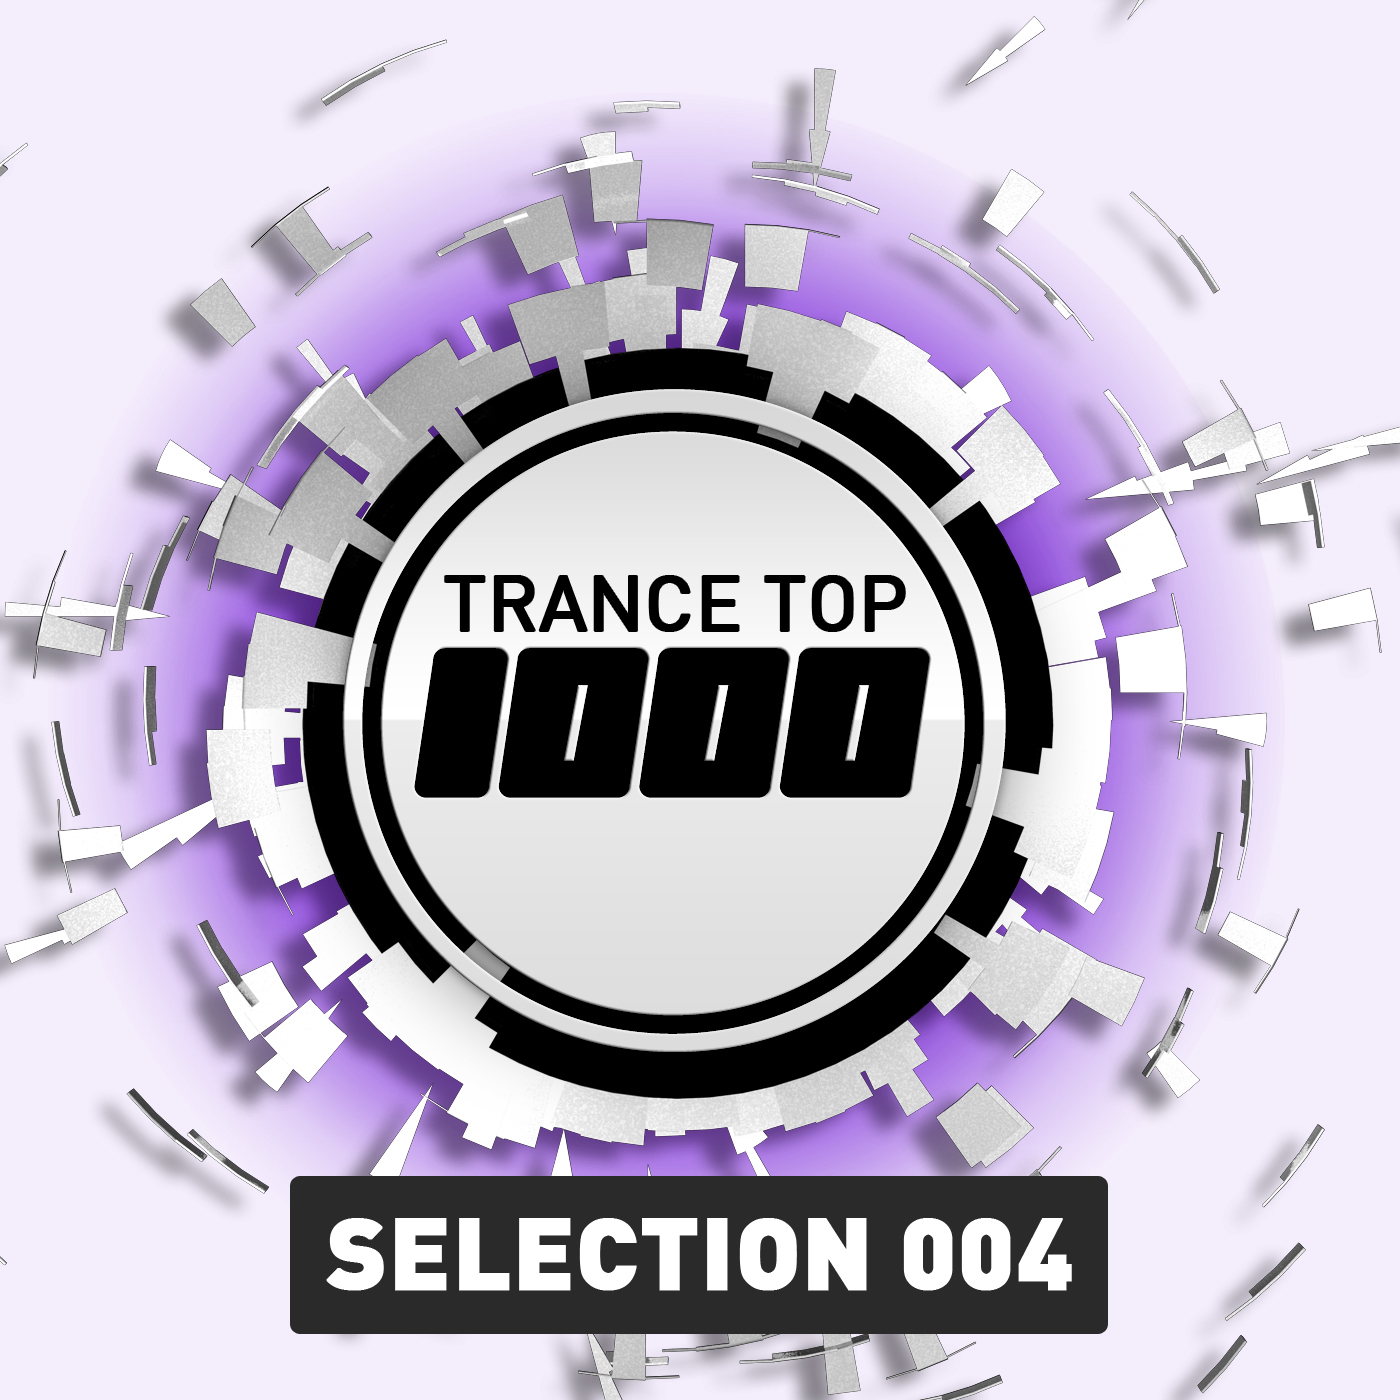 Trance Top 1000 Selection, Vol. 4 (Extended Versions)